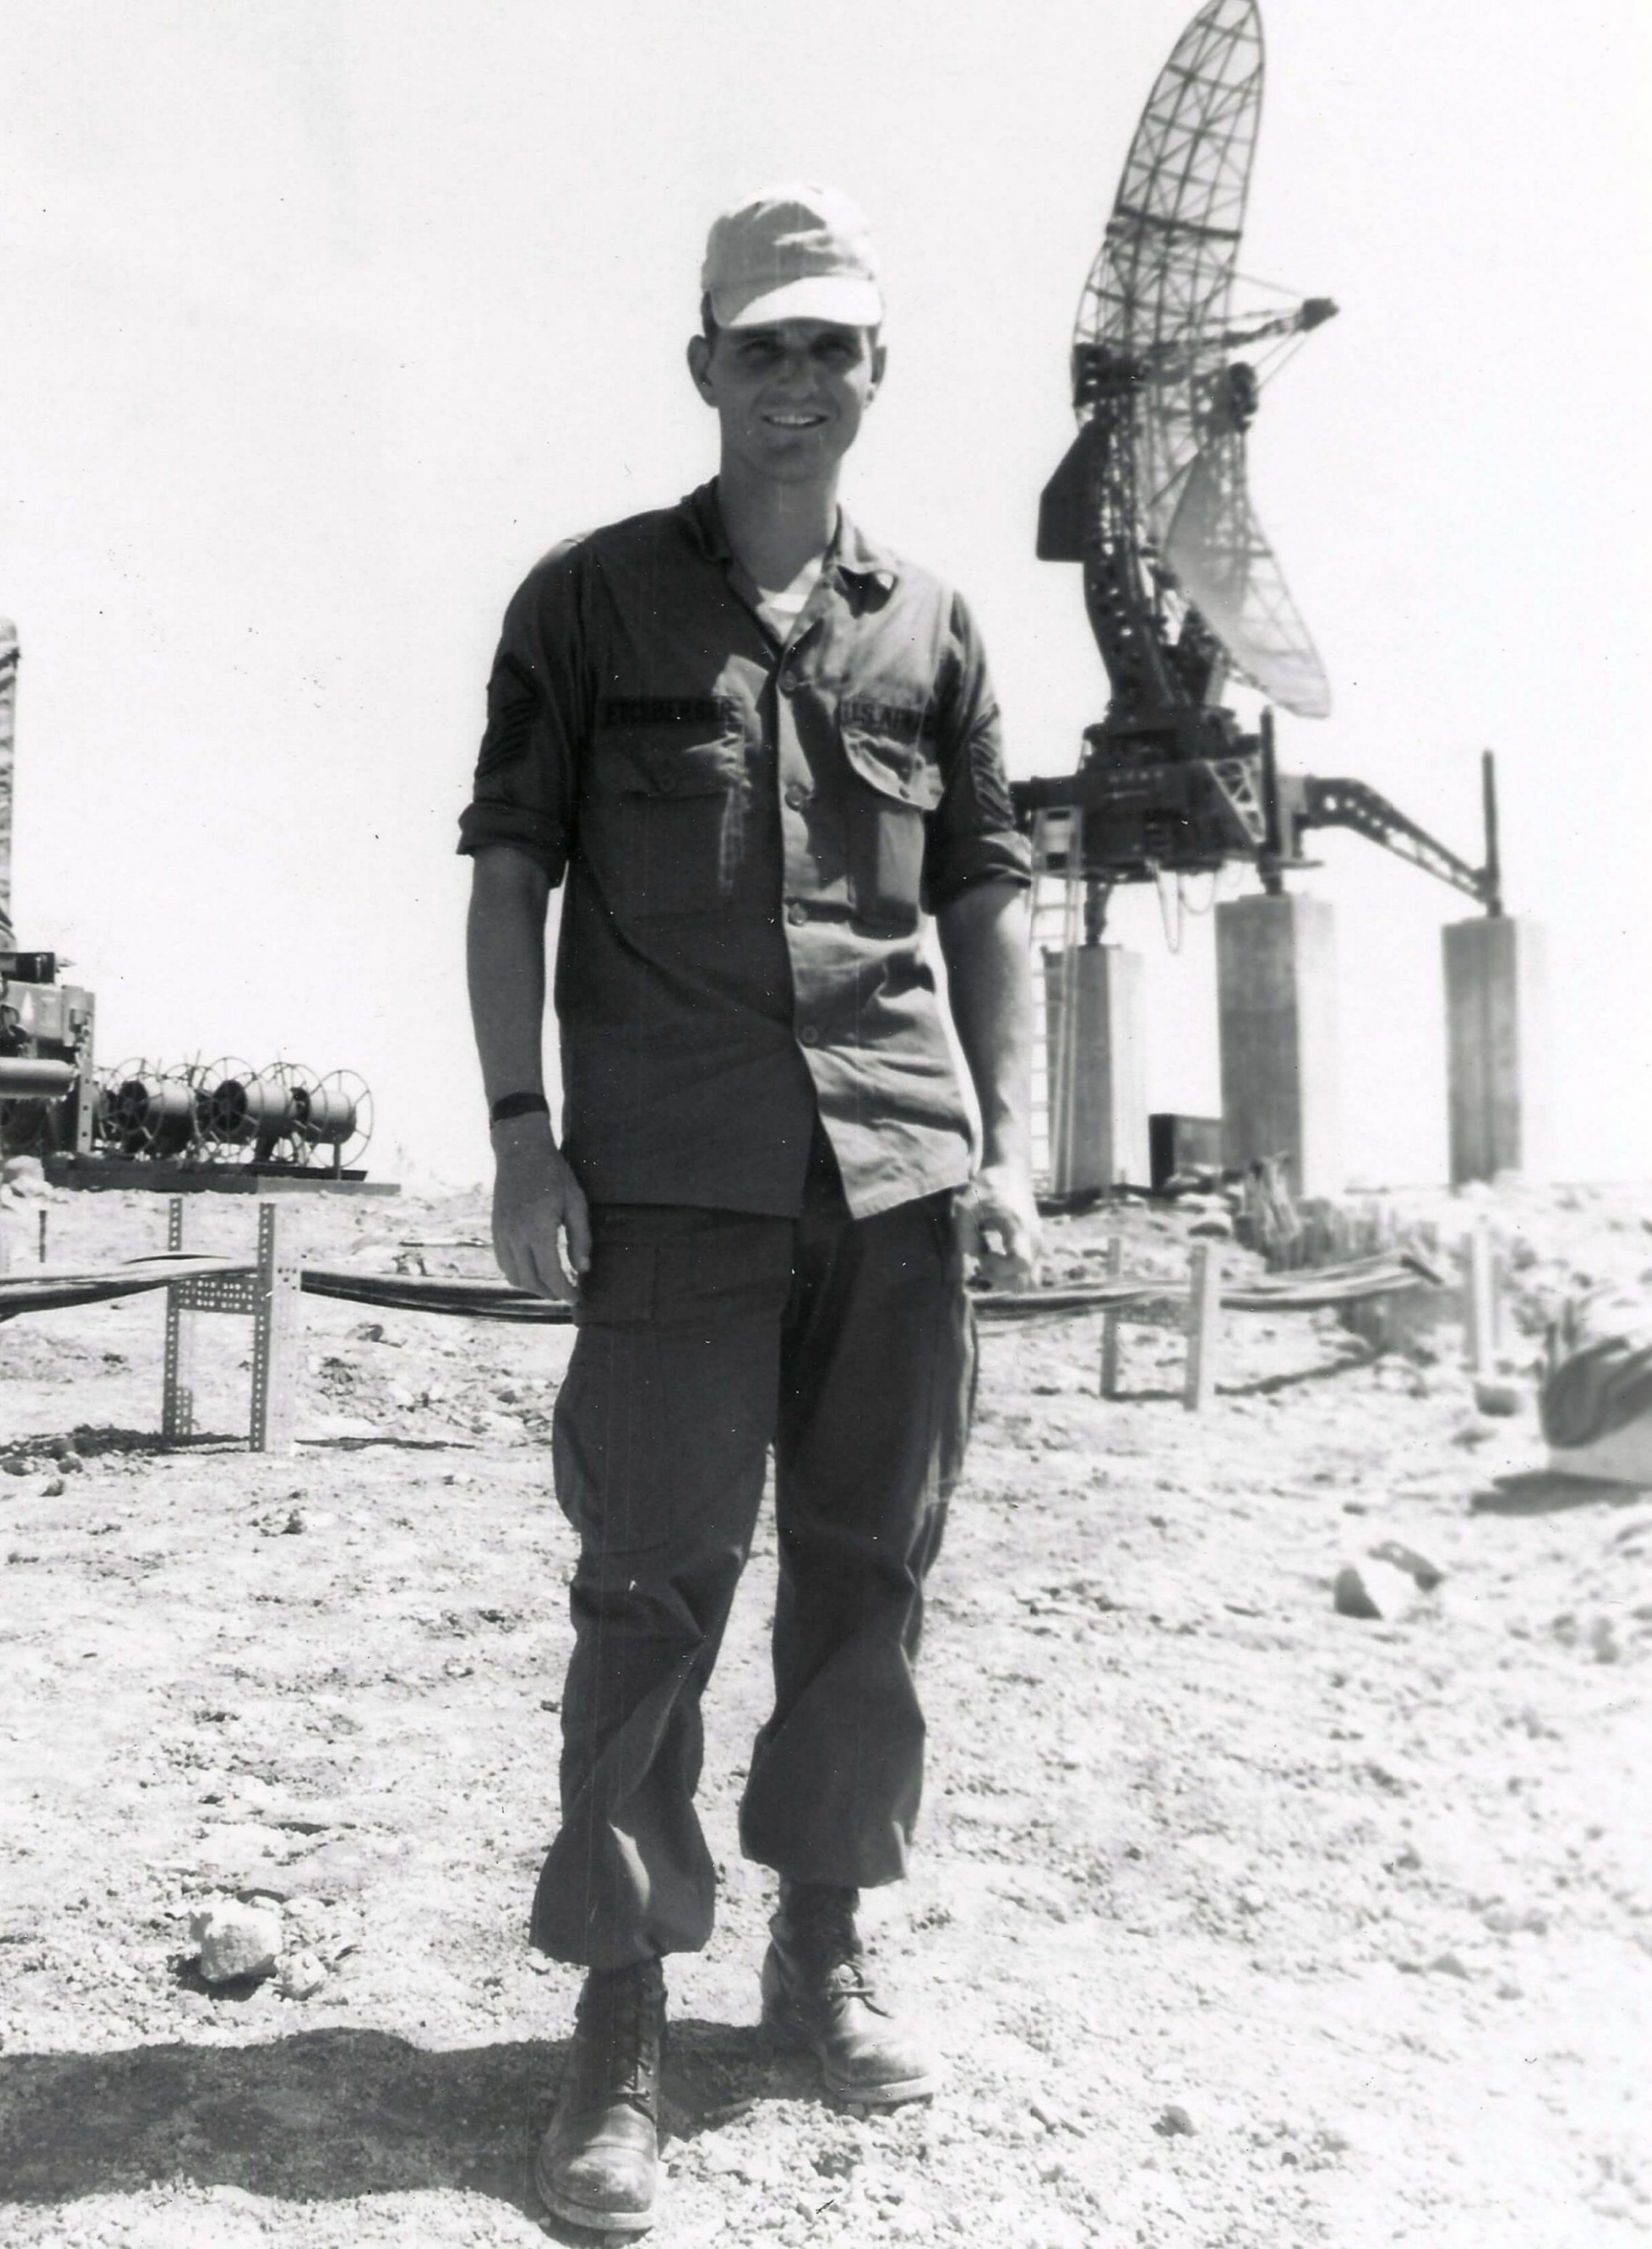 A U.S. soldier standing outside, in front of what looks to be a large satellite dish.